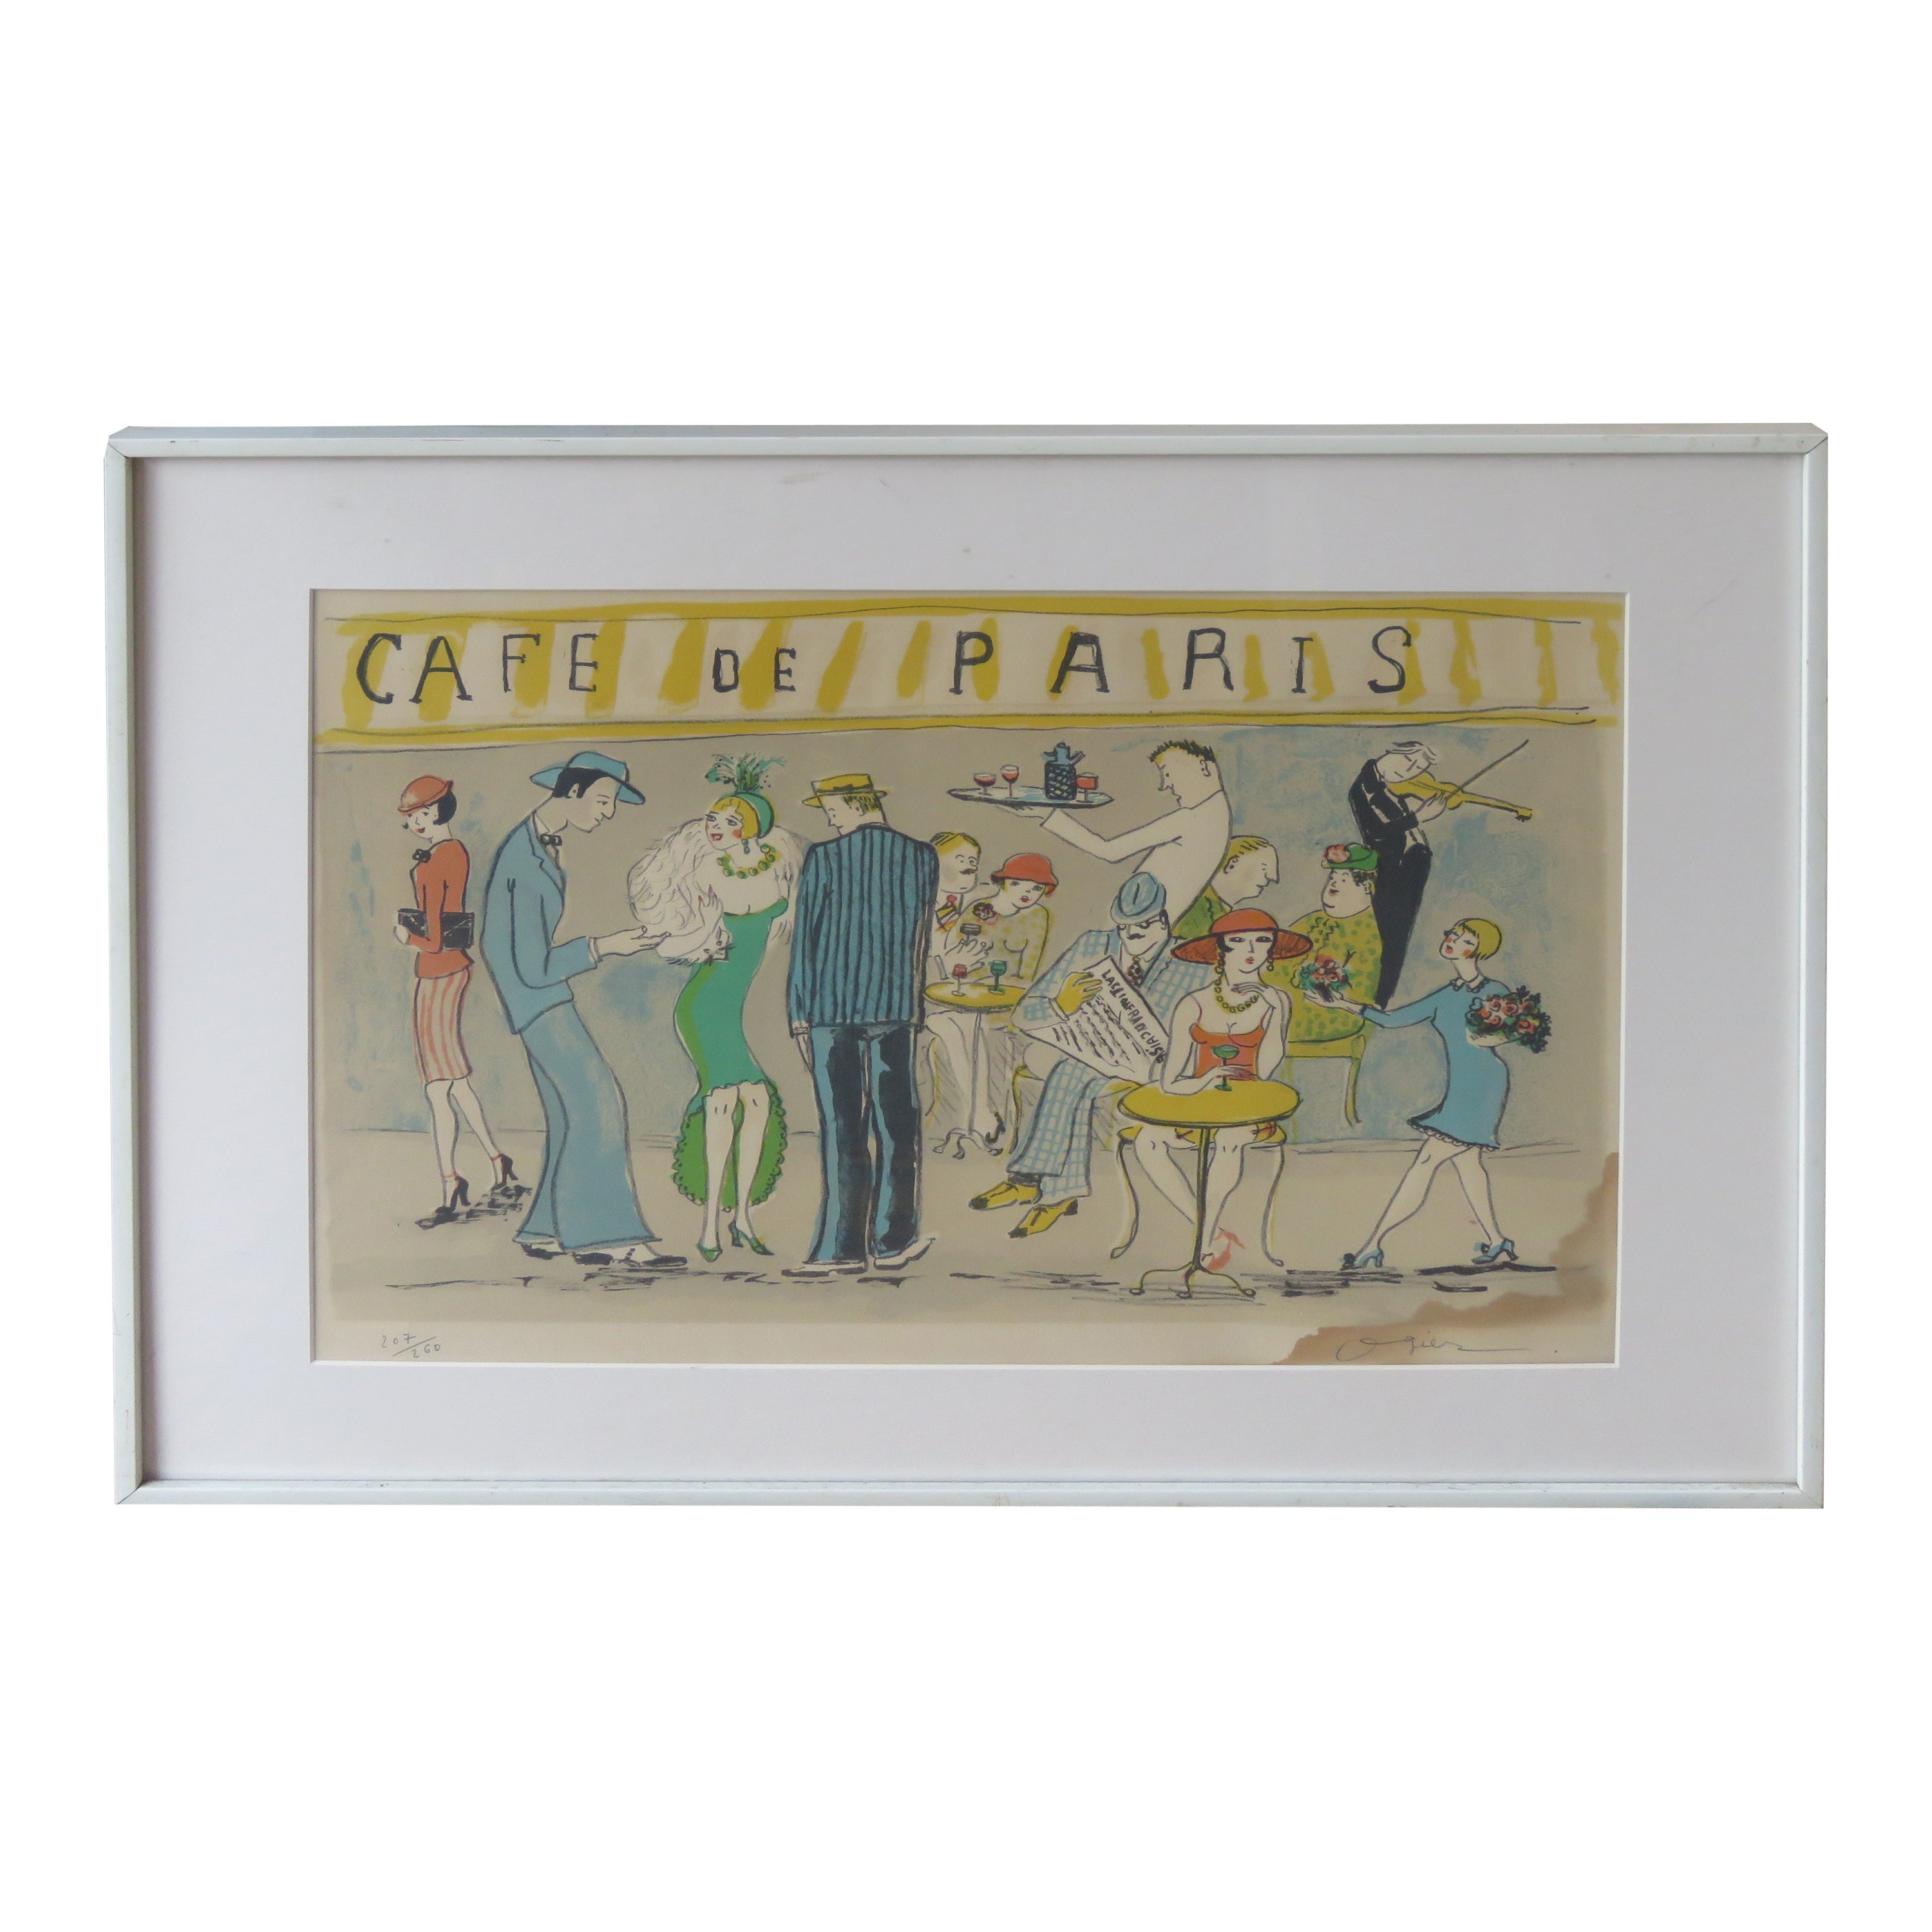 Rare Important Original 1930s-40s Paris Cafe Lithograph Etching Drawing For Sale